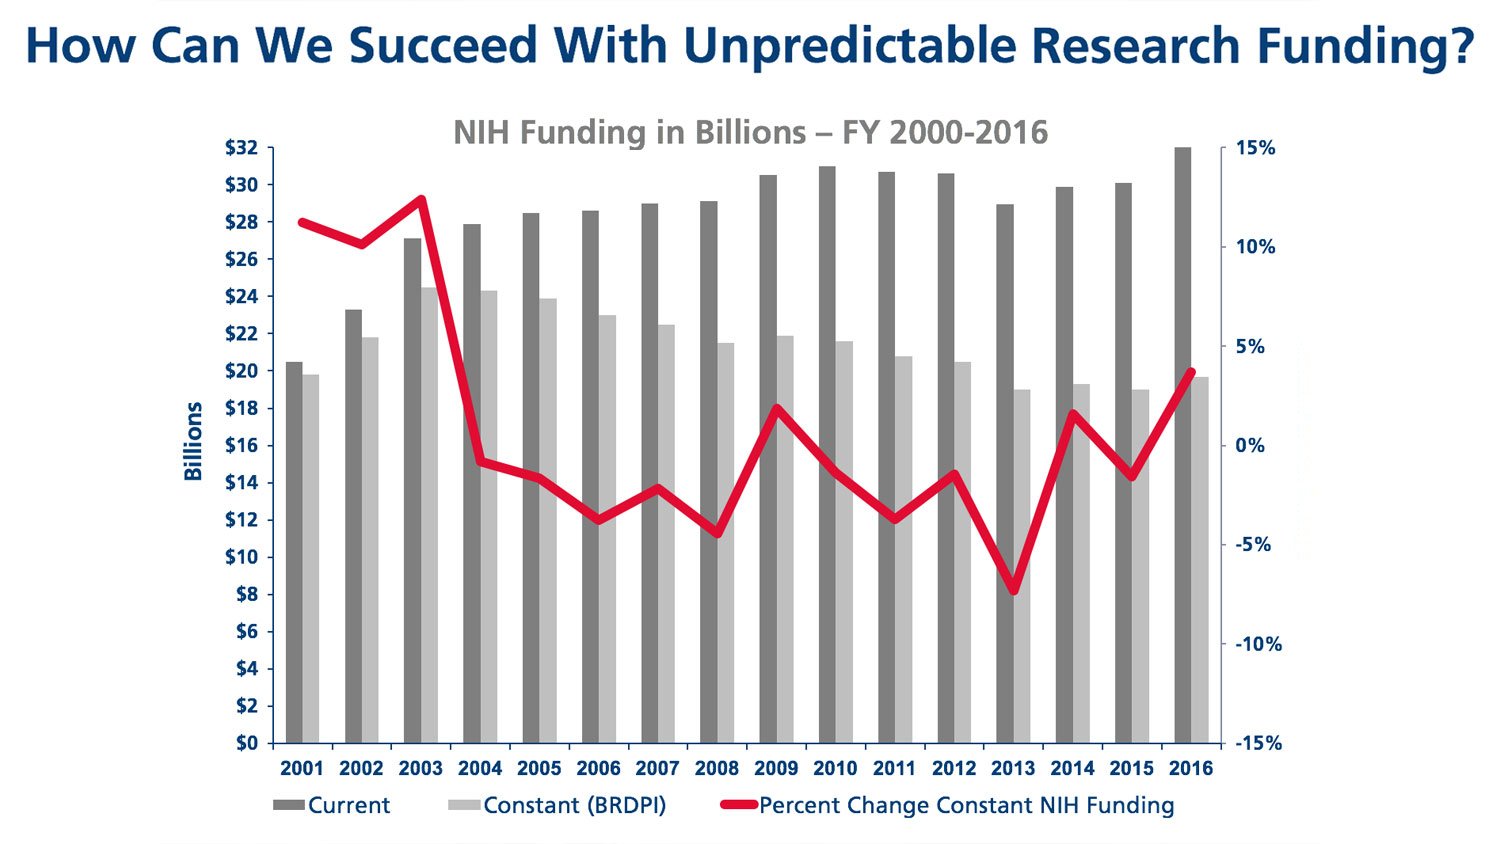 The red line represents the percent change in constant NIH funding. Although the NIH budget appears to be increasing, it is shrinking in purchasing power.